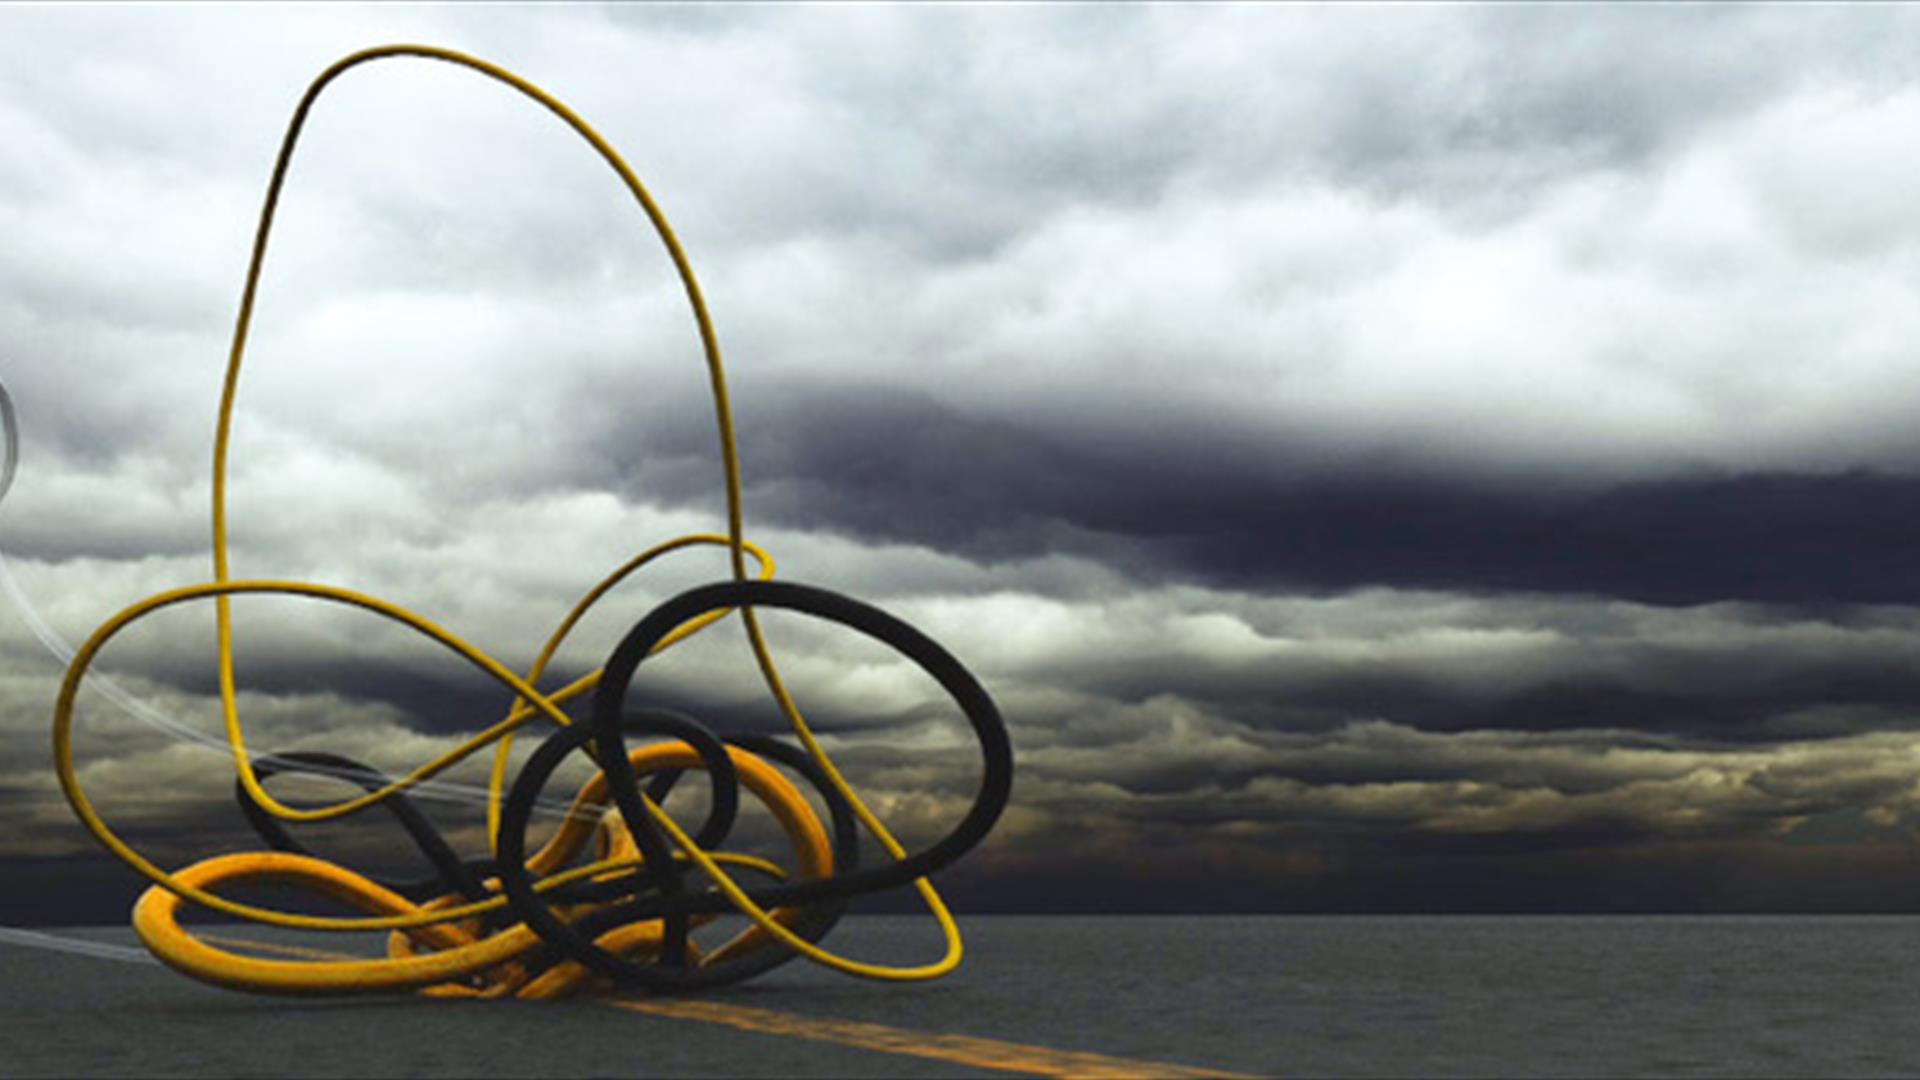 Grey cloudy stormy sky with hint of yellow sunset in the background. There are two pipes: yellow and black which are interweaved in the foreground.